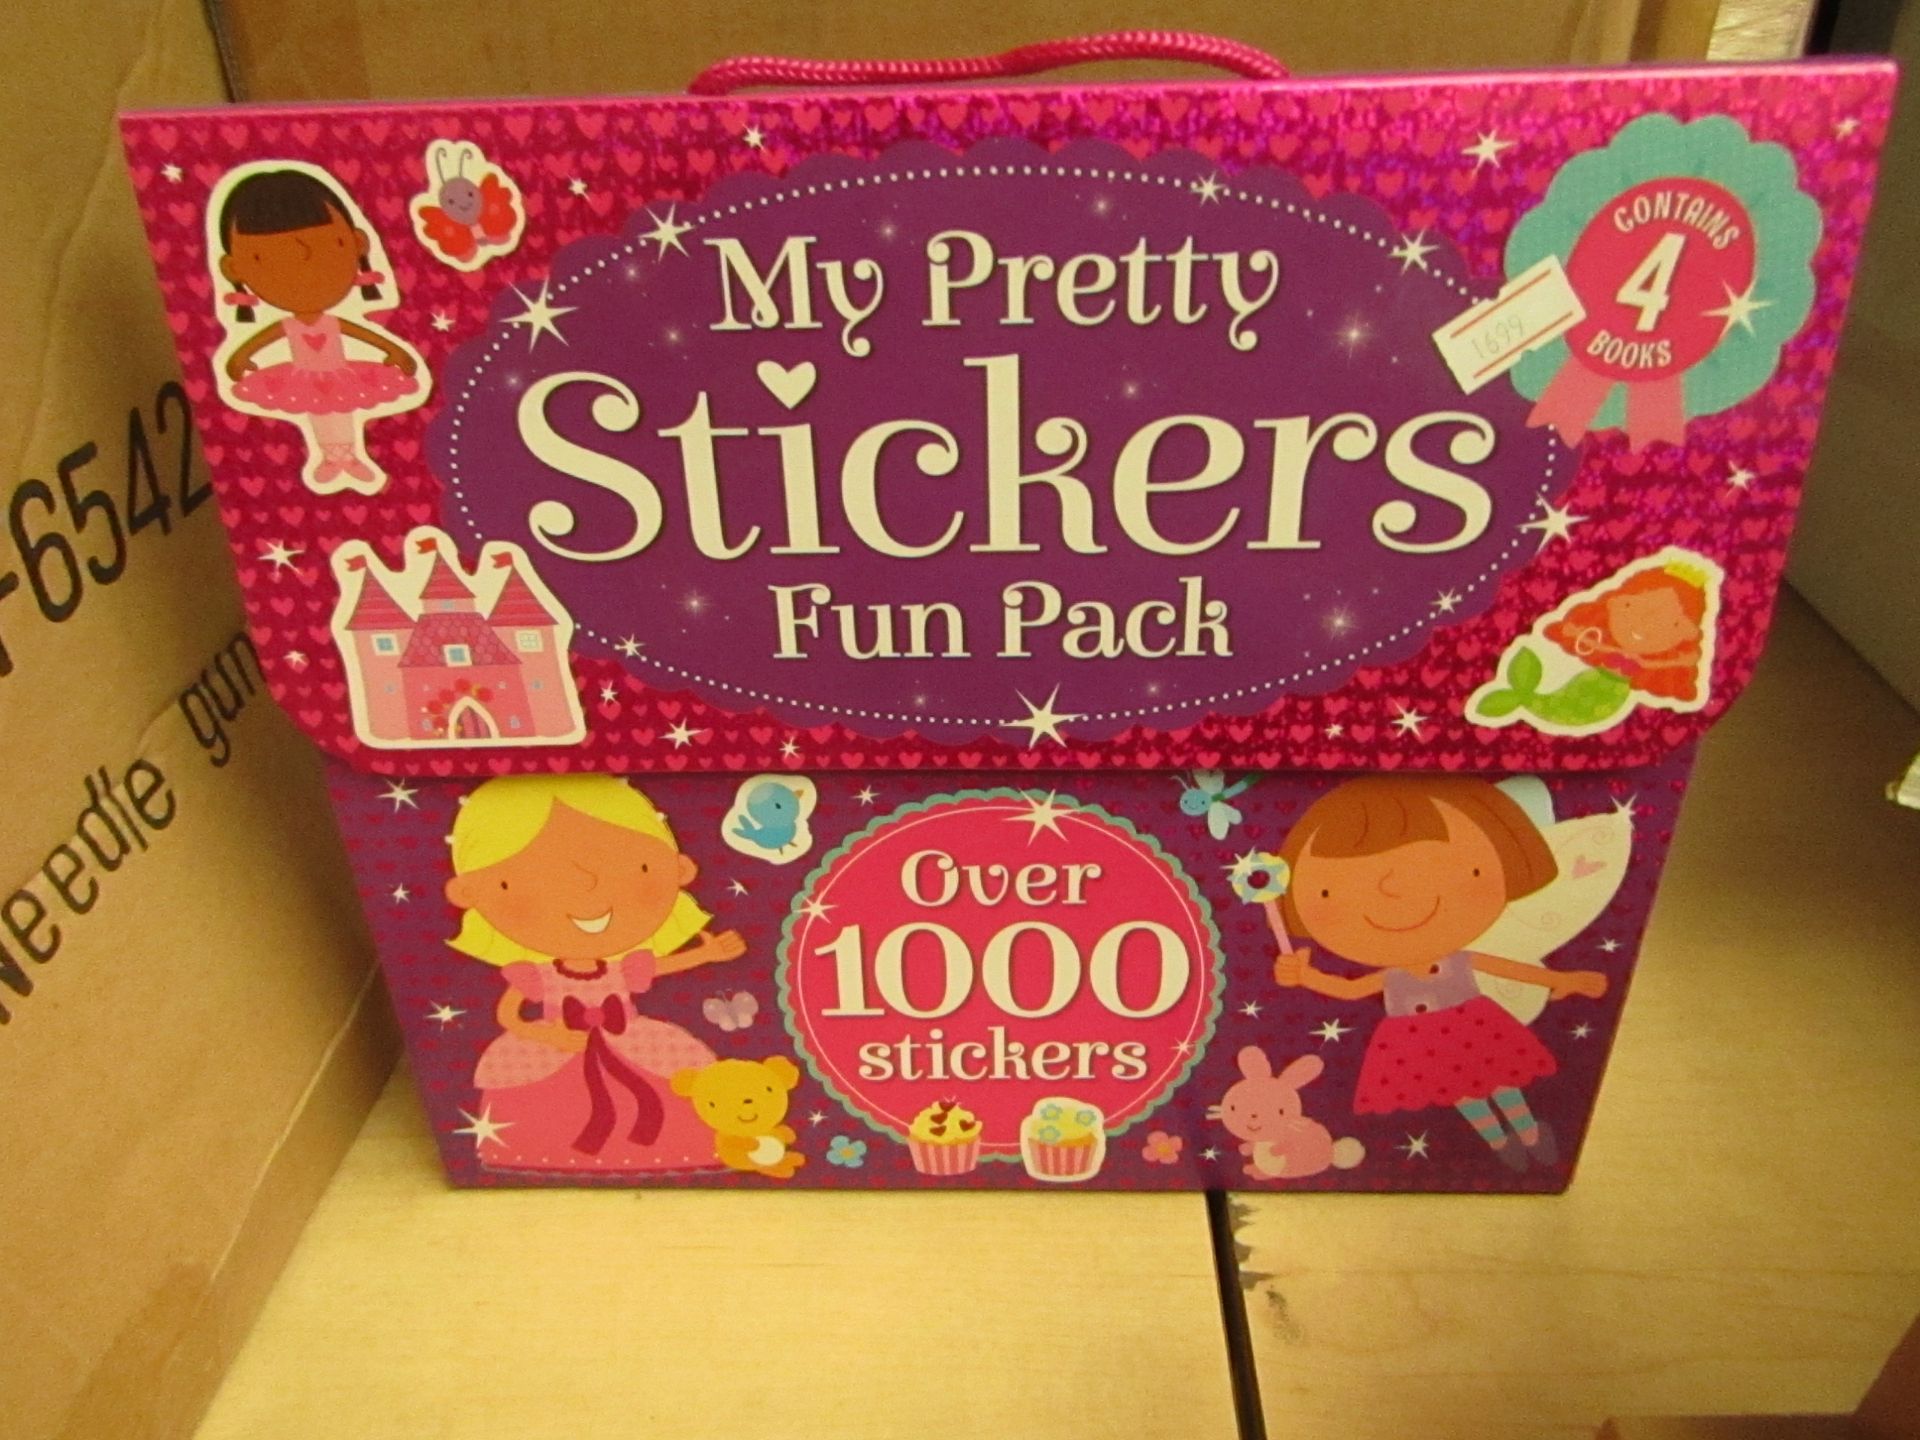 Box of 6 "My Pretty Stickers Fun Pack", each one contains 4 books and over 1000 stickers - Boxed &